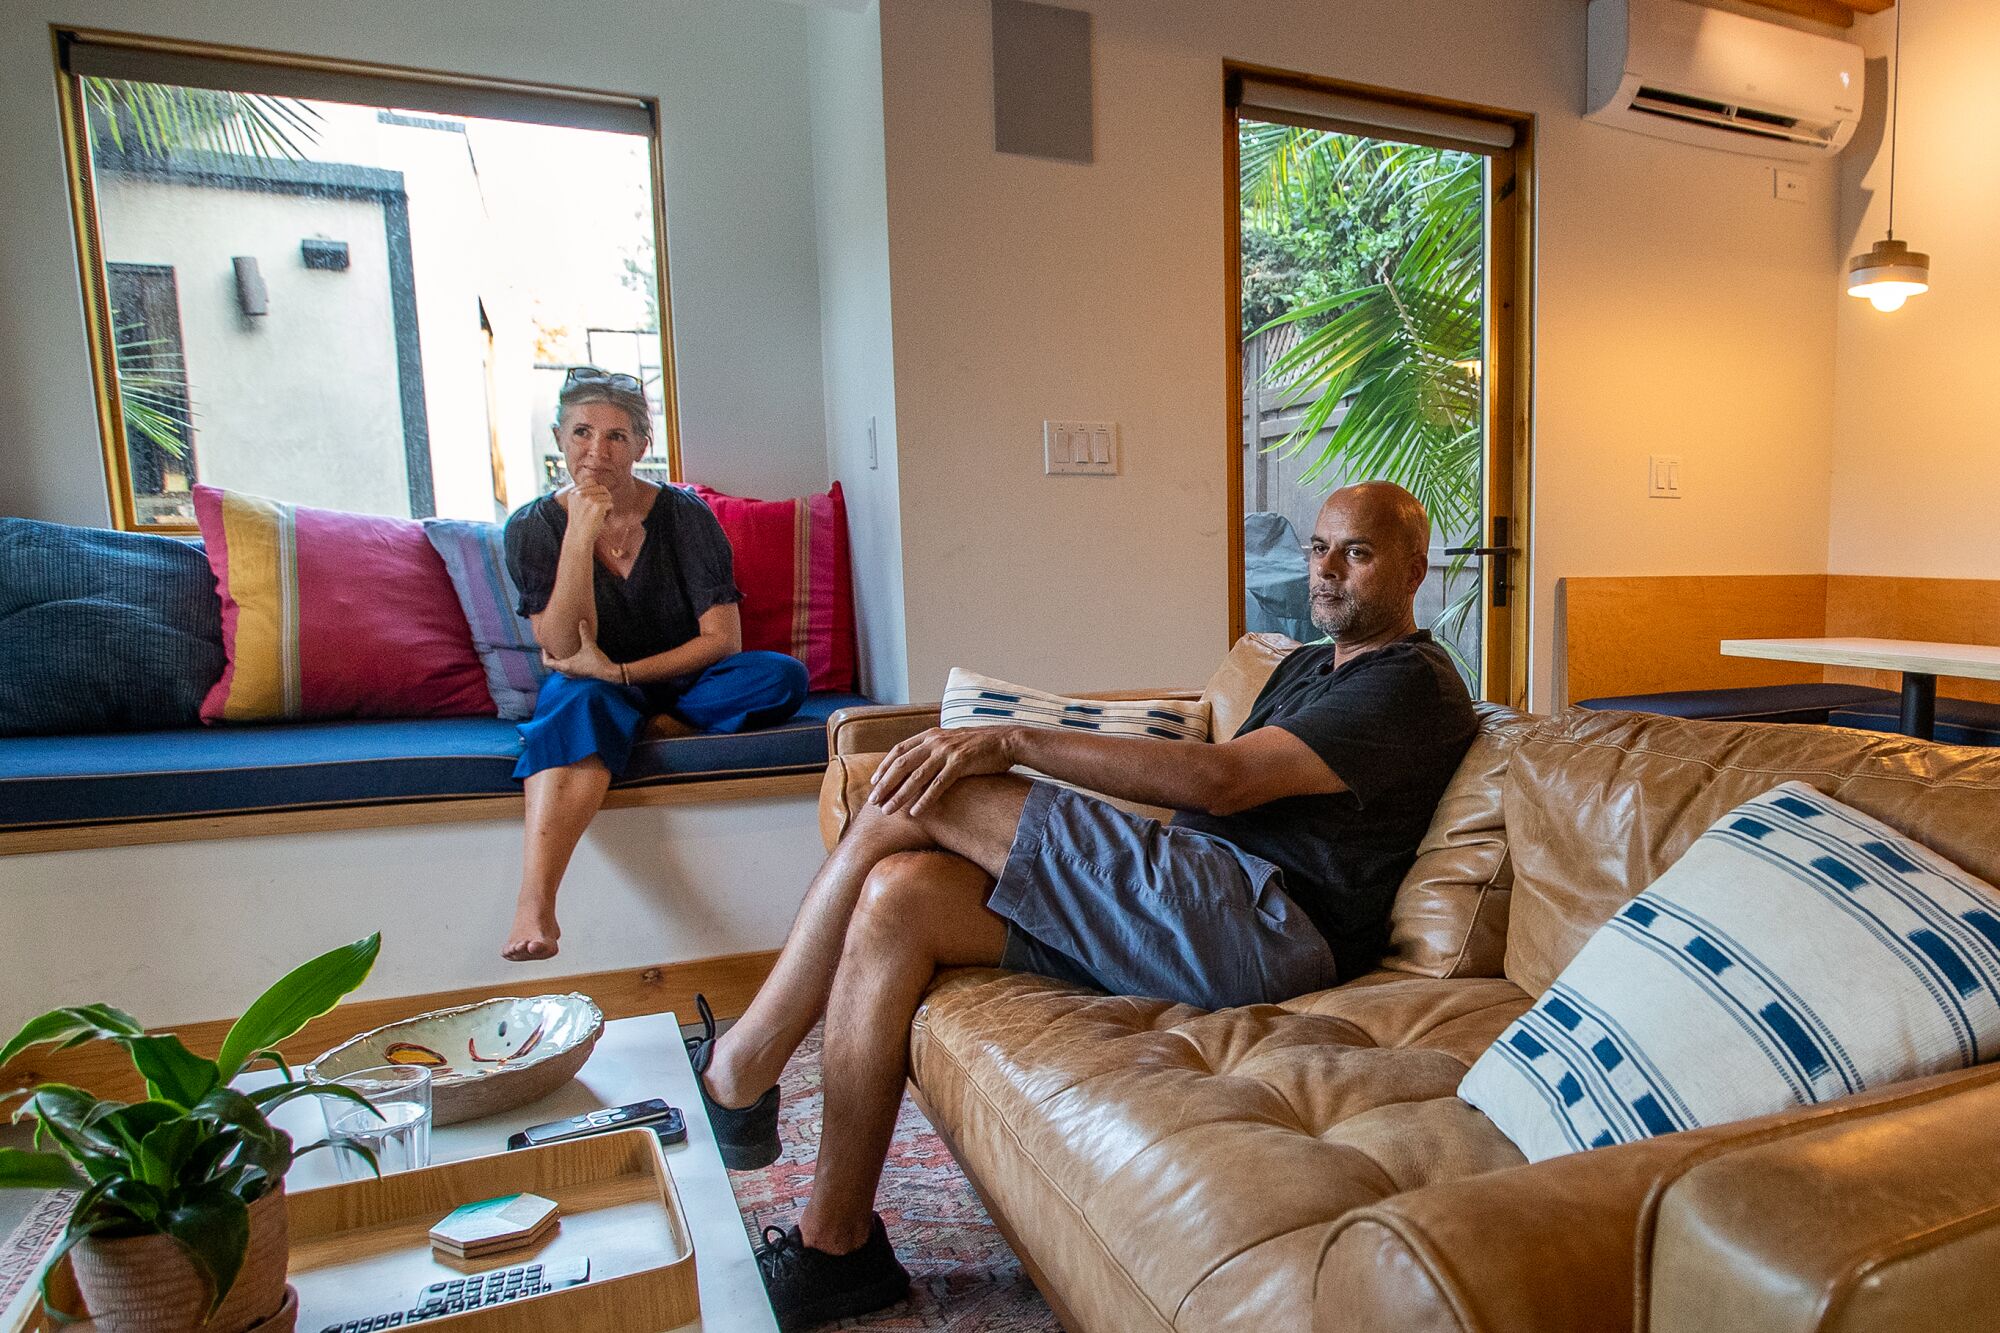 A man sitting on a couch and a woman sitting on a window seat in a living room.